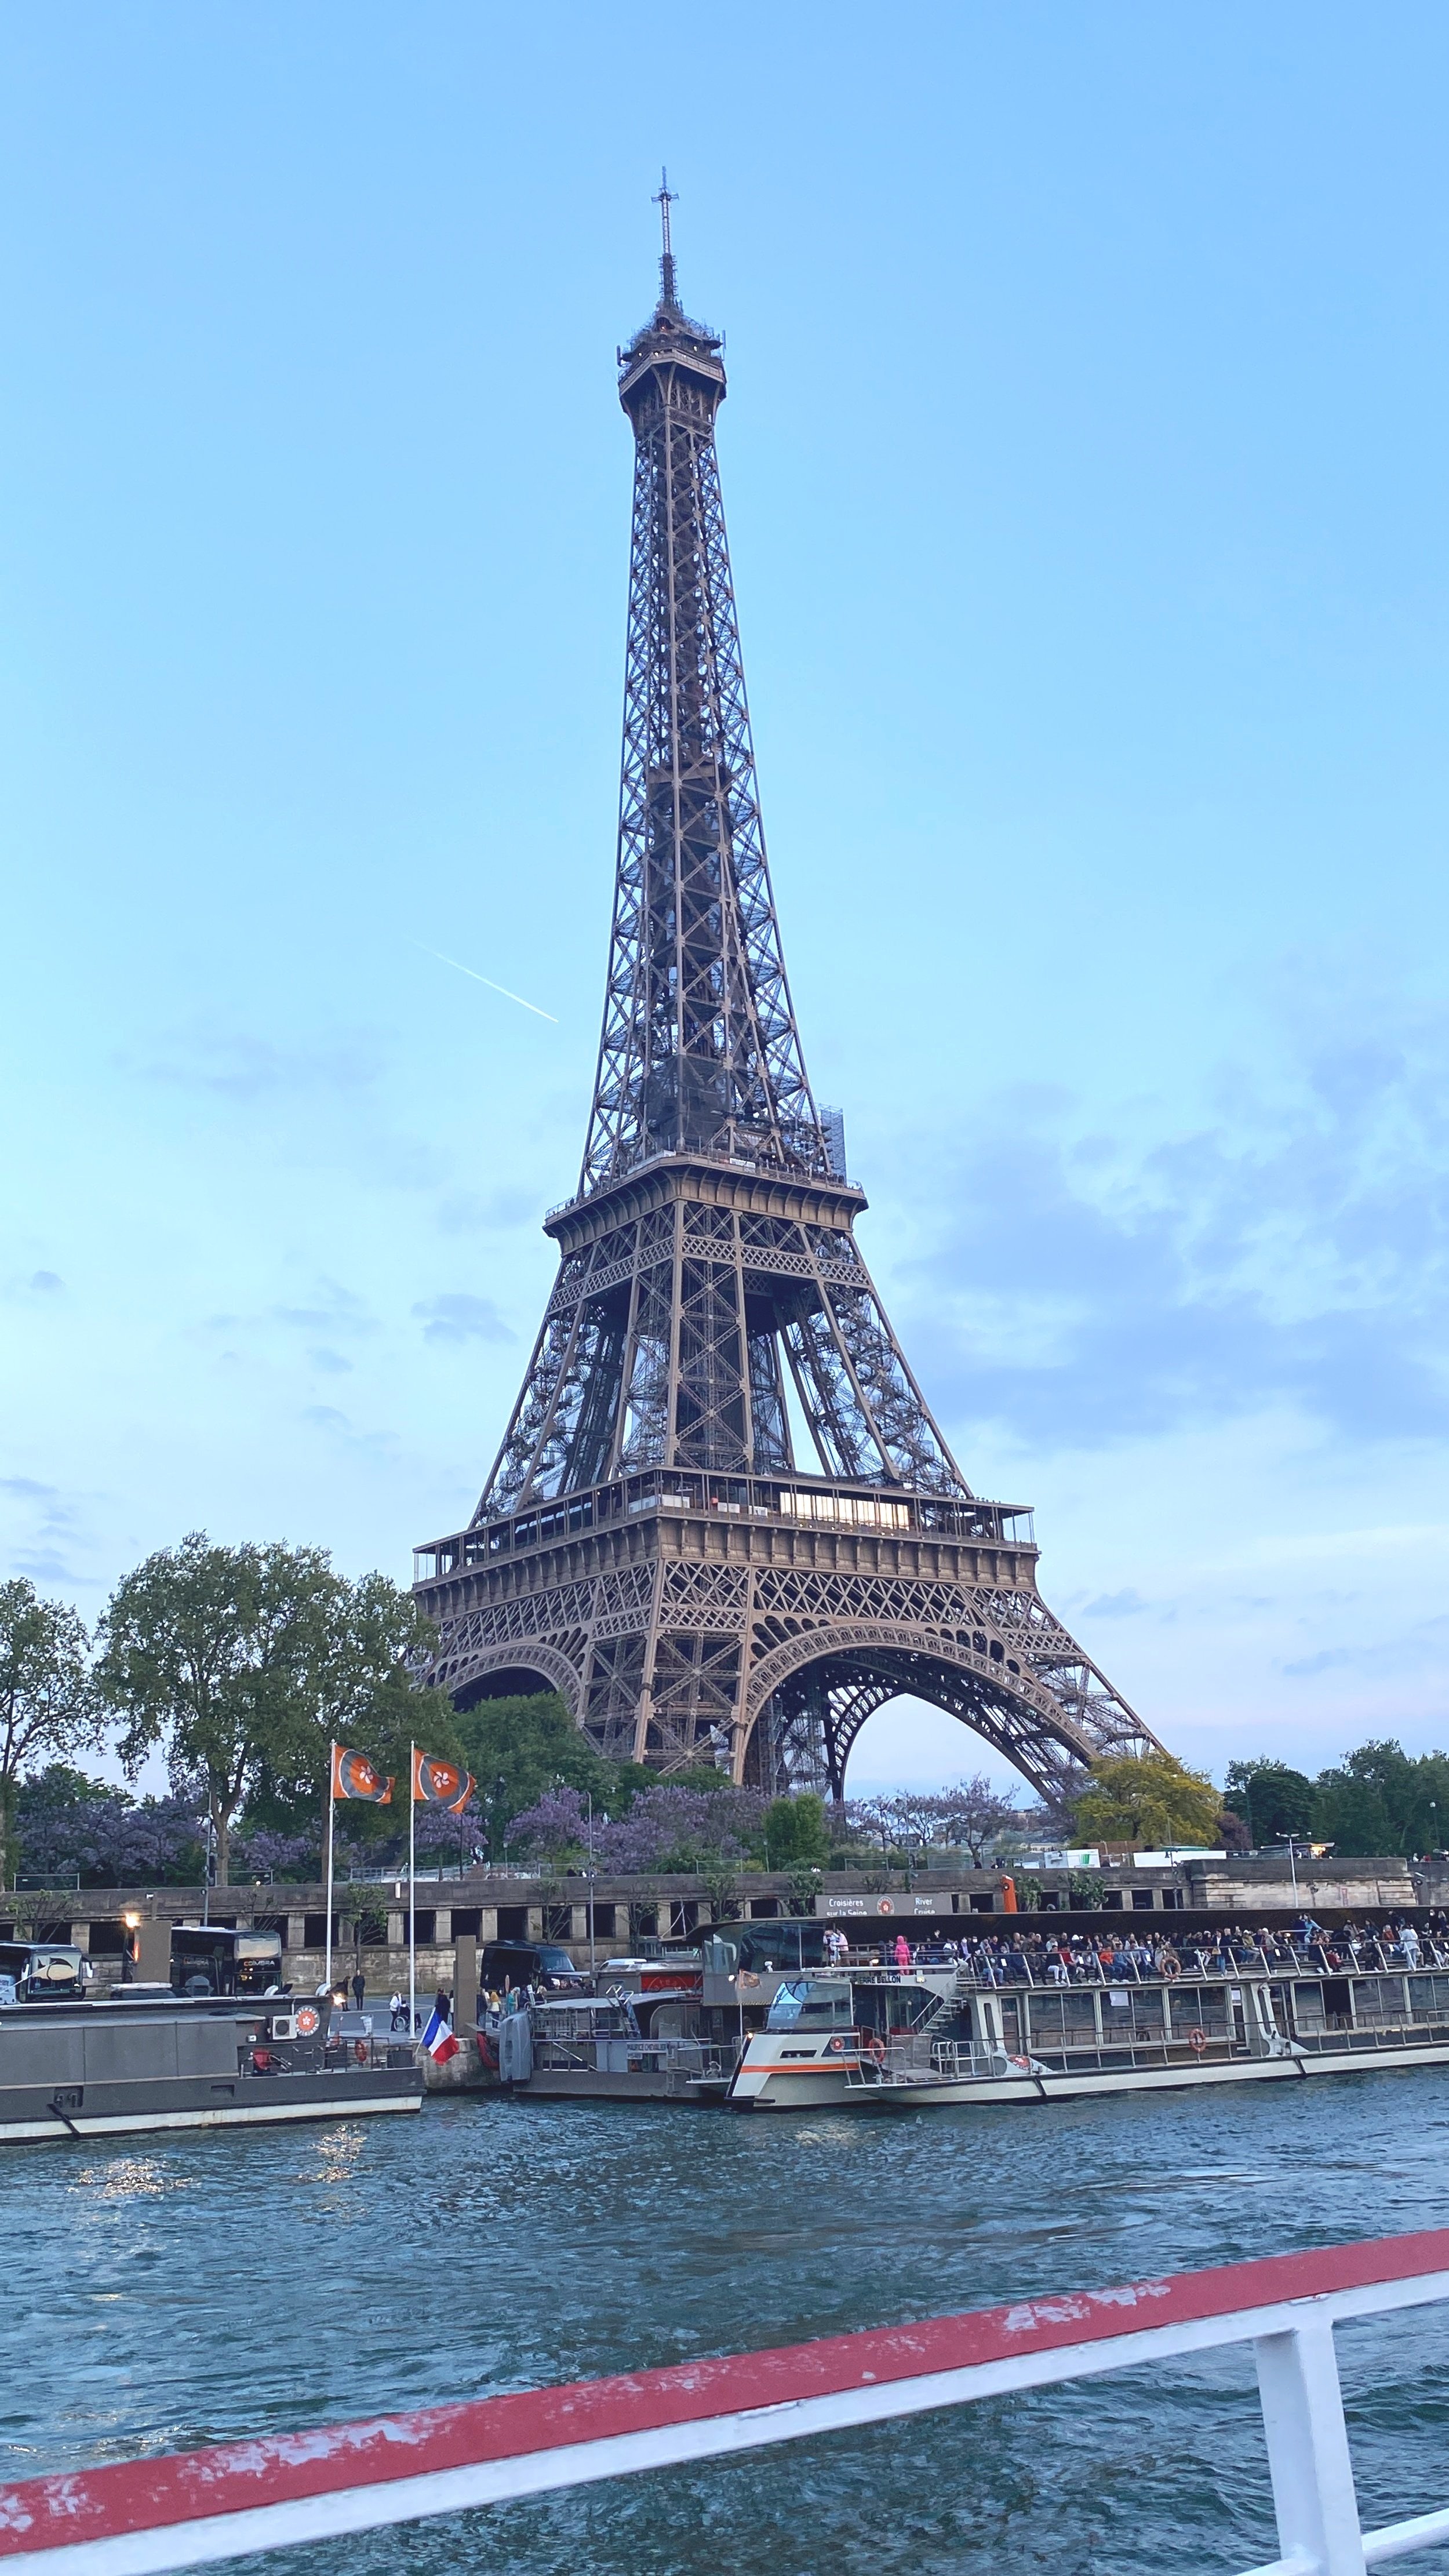 View of the Eiffel Tower from the Bateaux Mouches